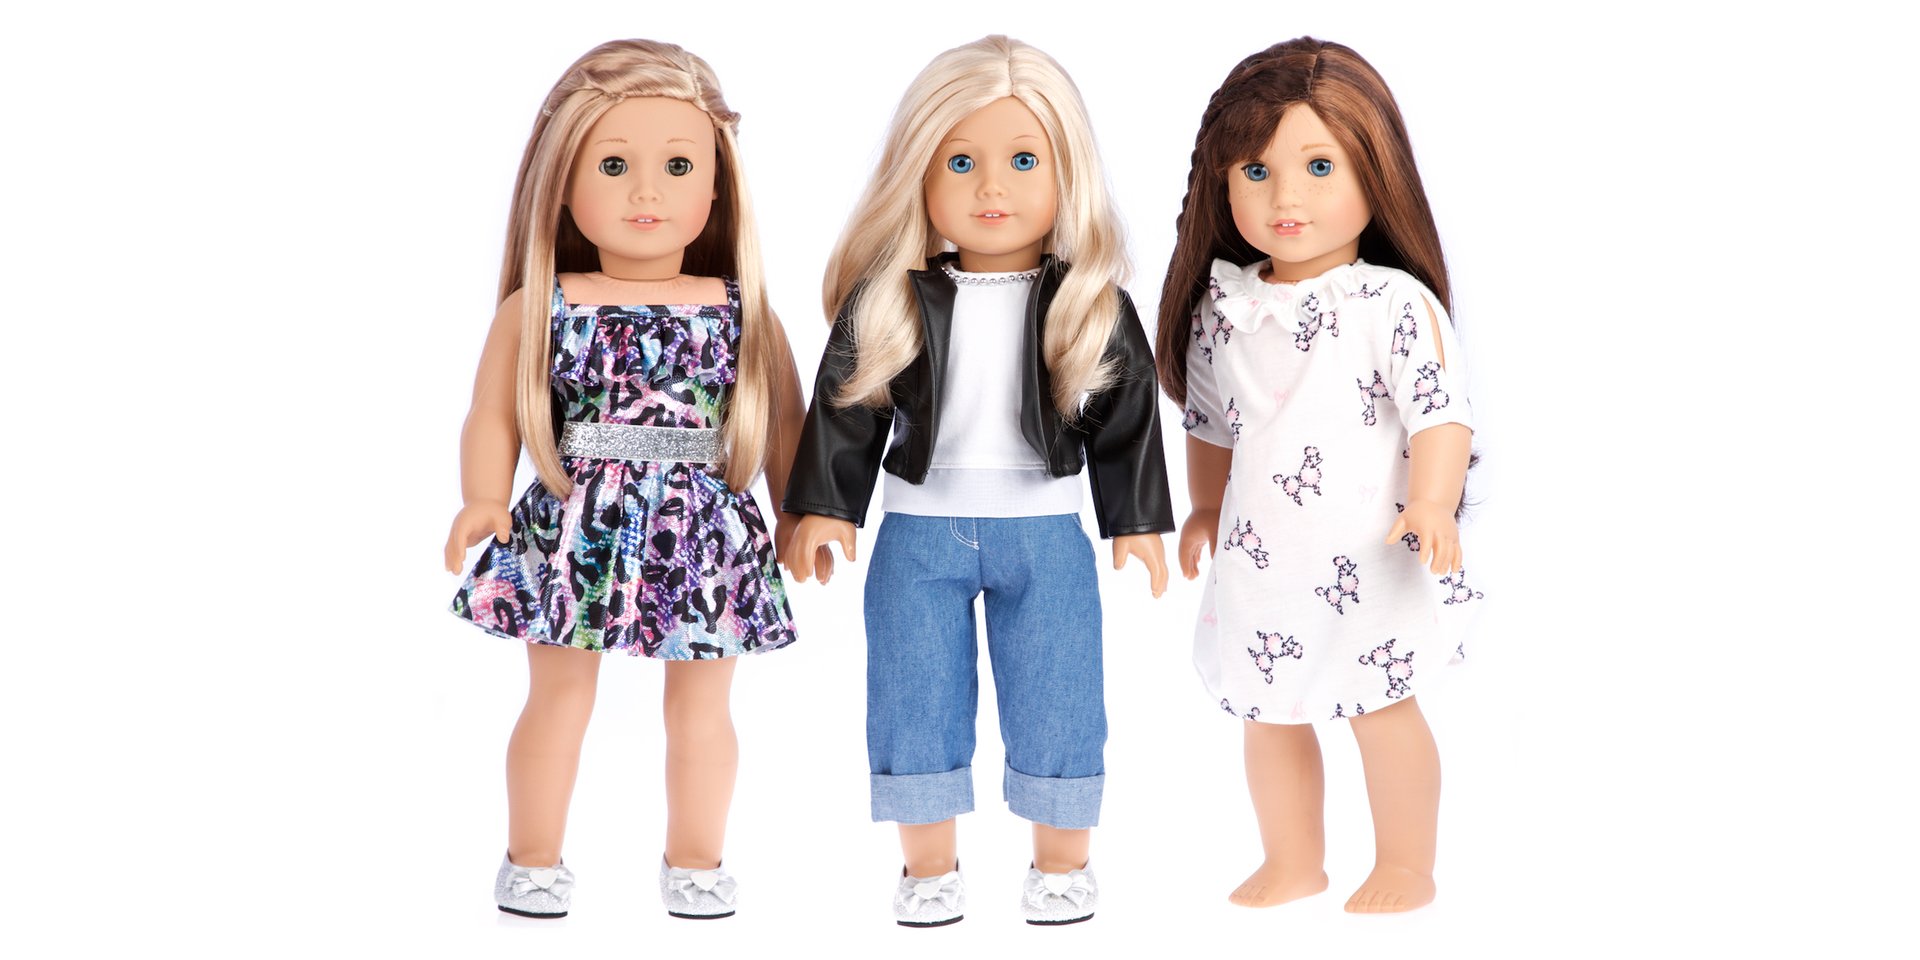 Ultimate Doll Playset - Doll Clothes